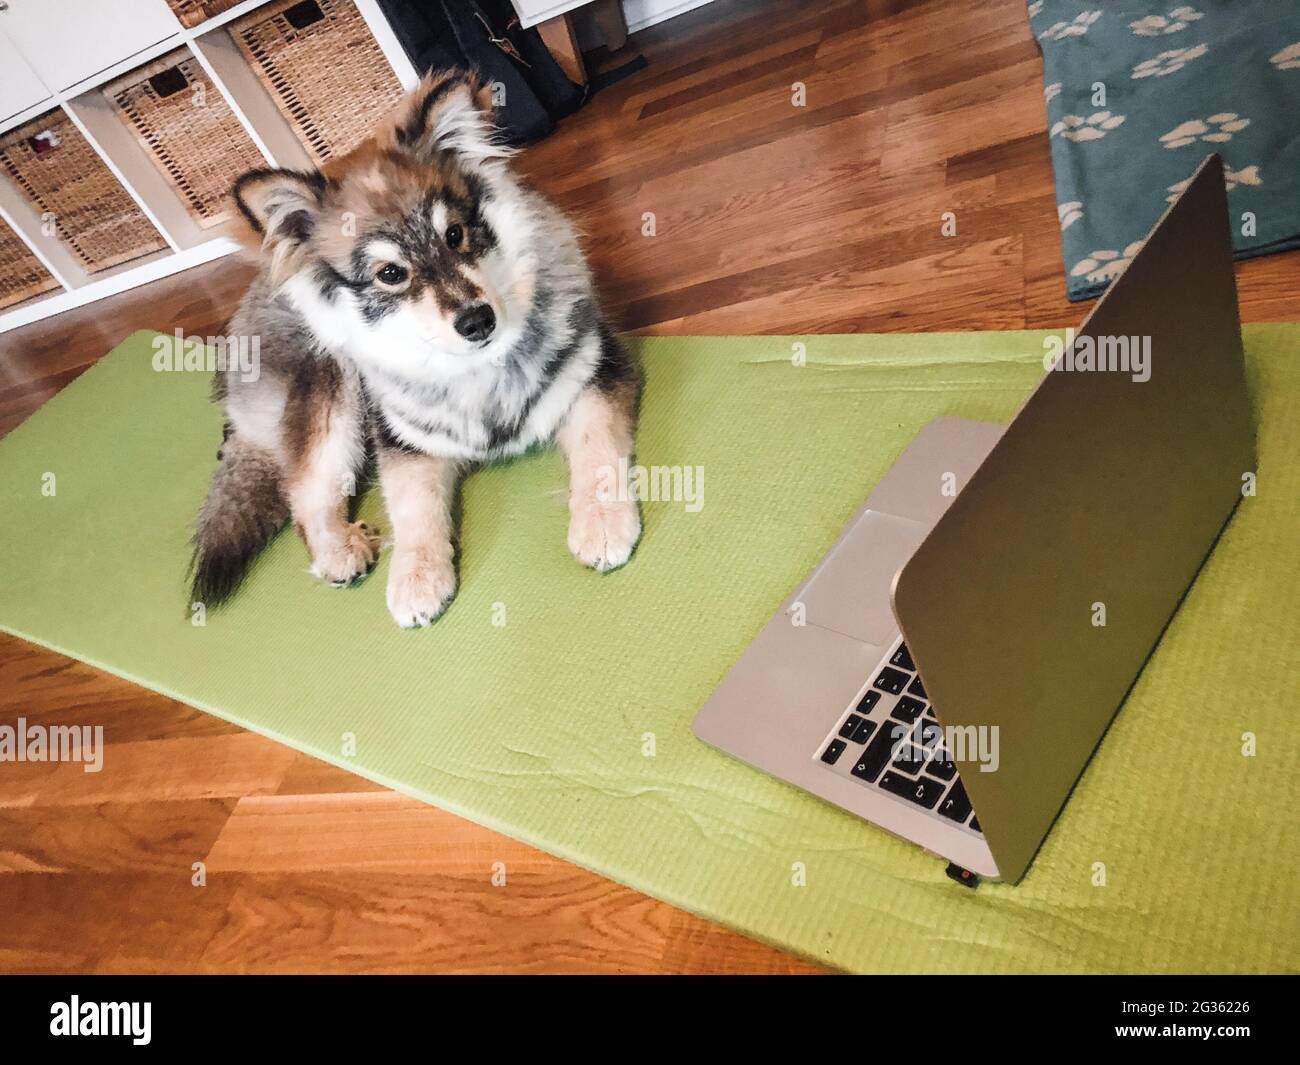 Photo of a puppy Finnish Lapphund dog doing fitness or workout Stock Photo